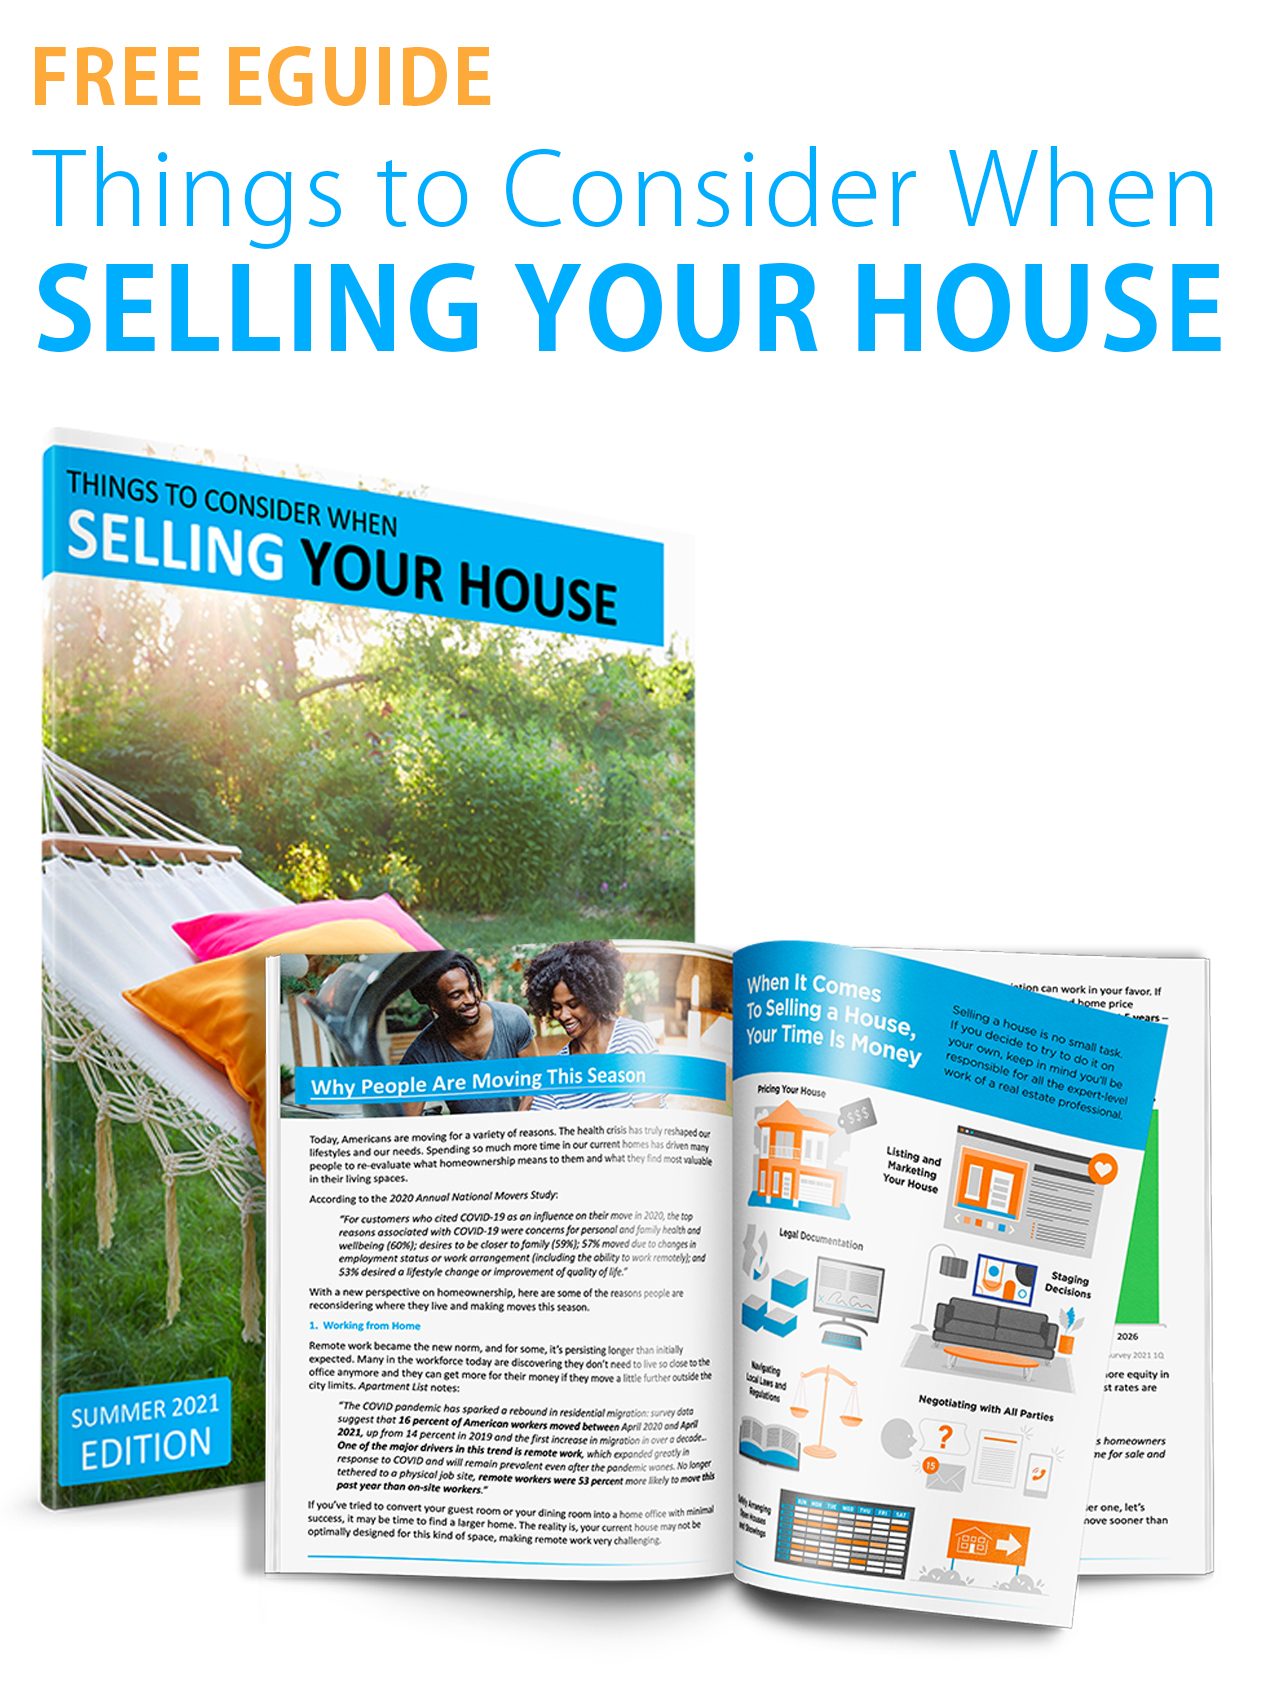 Things to Consider When Selling Your House